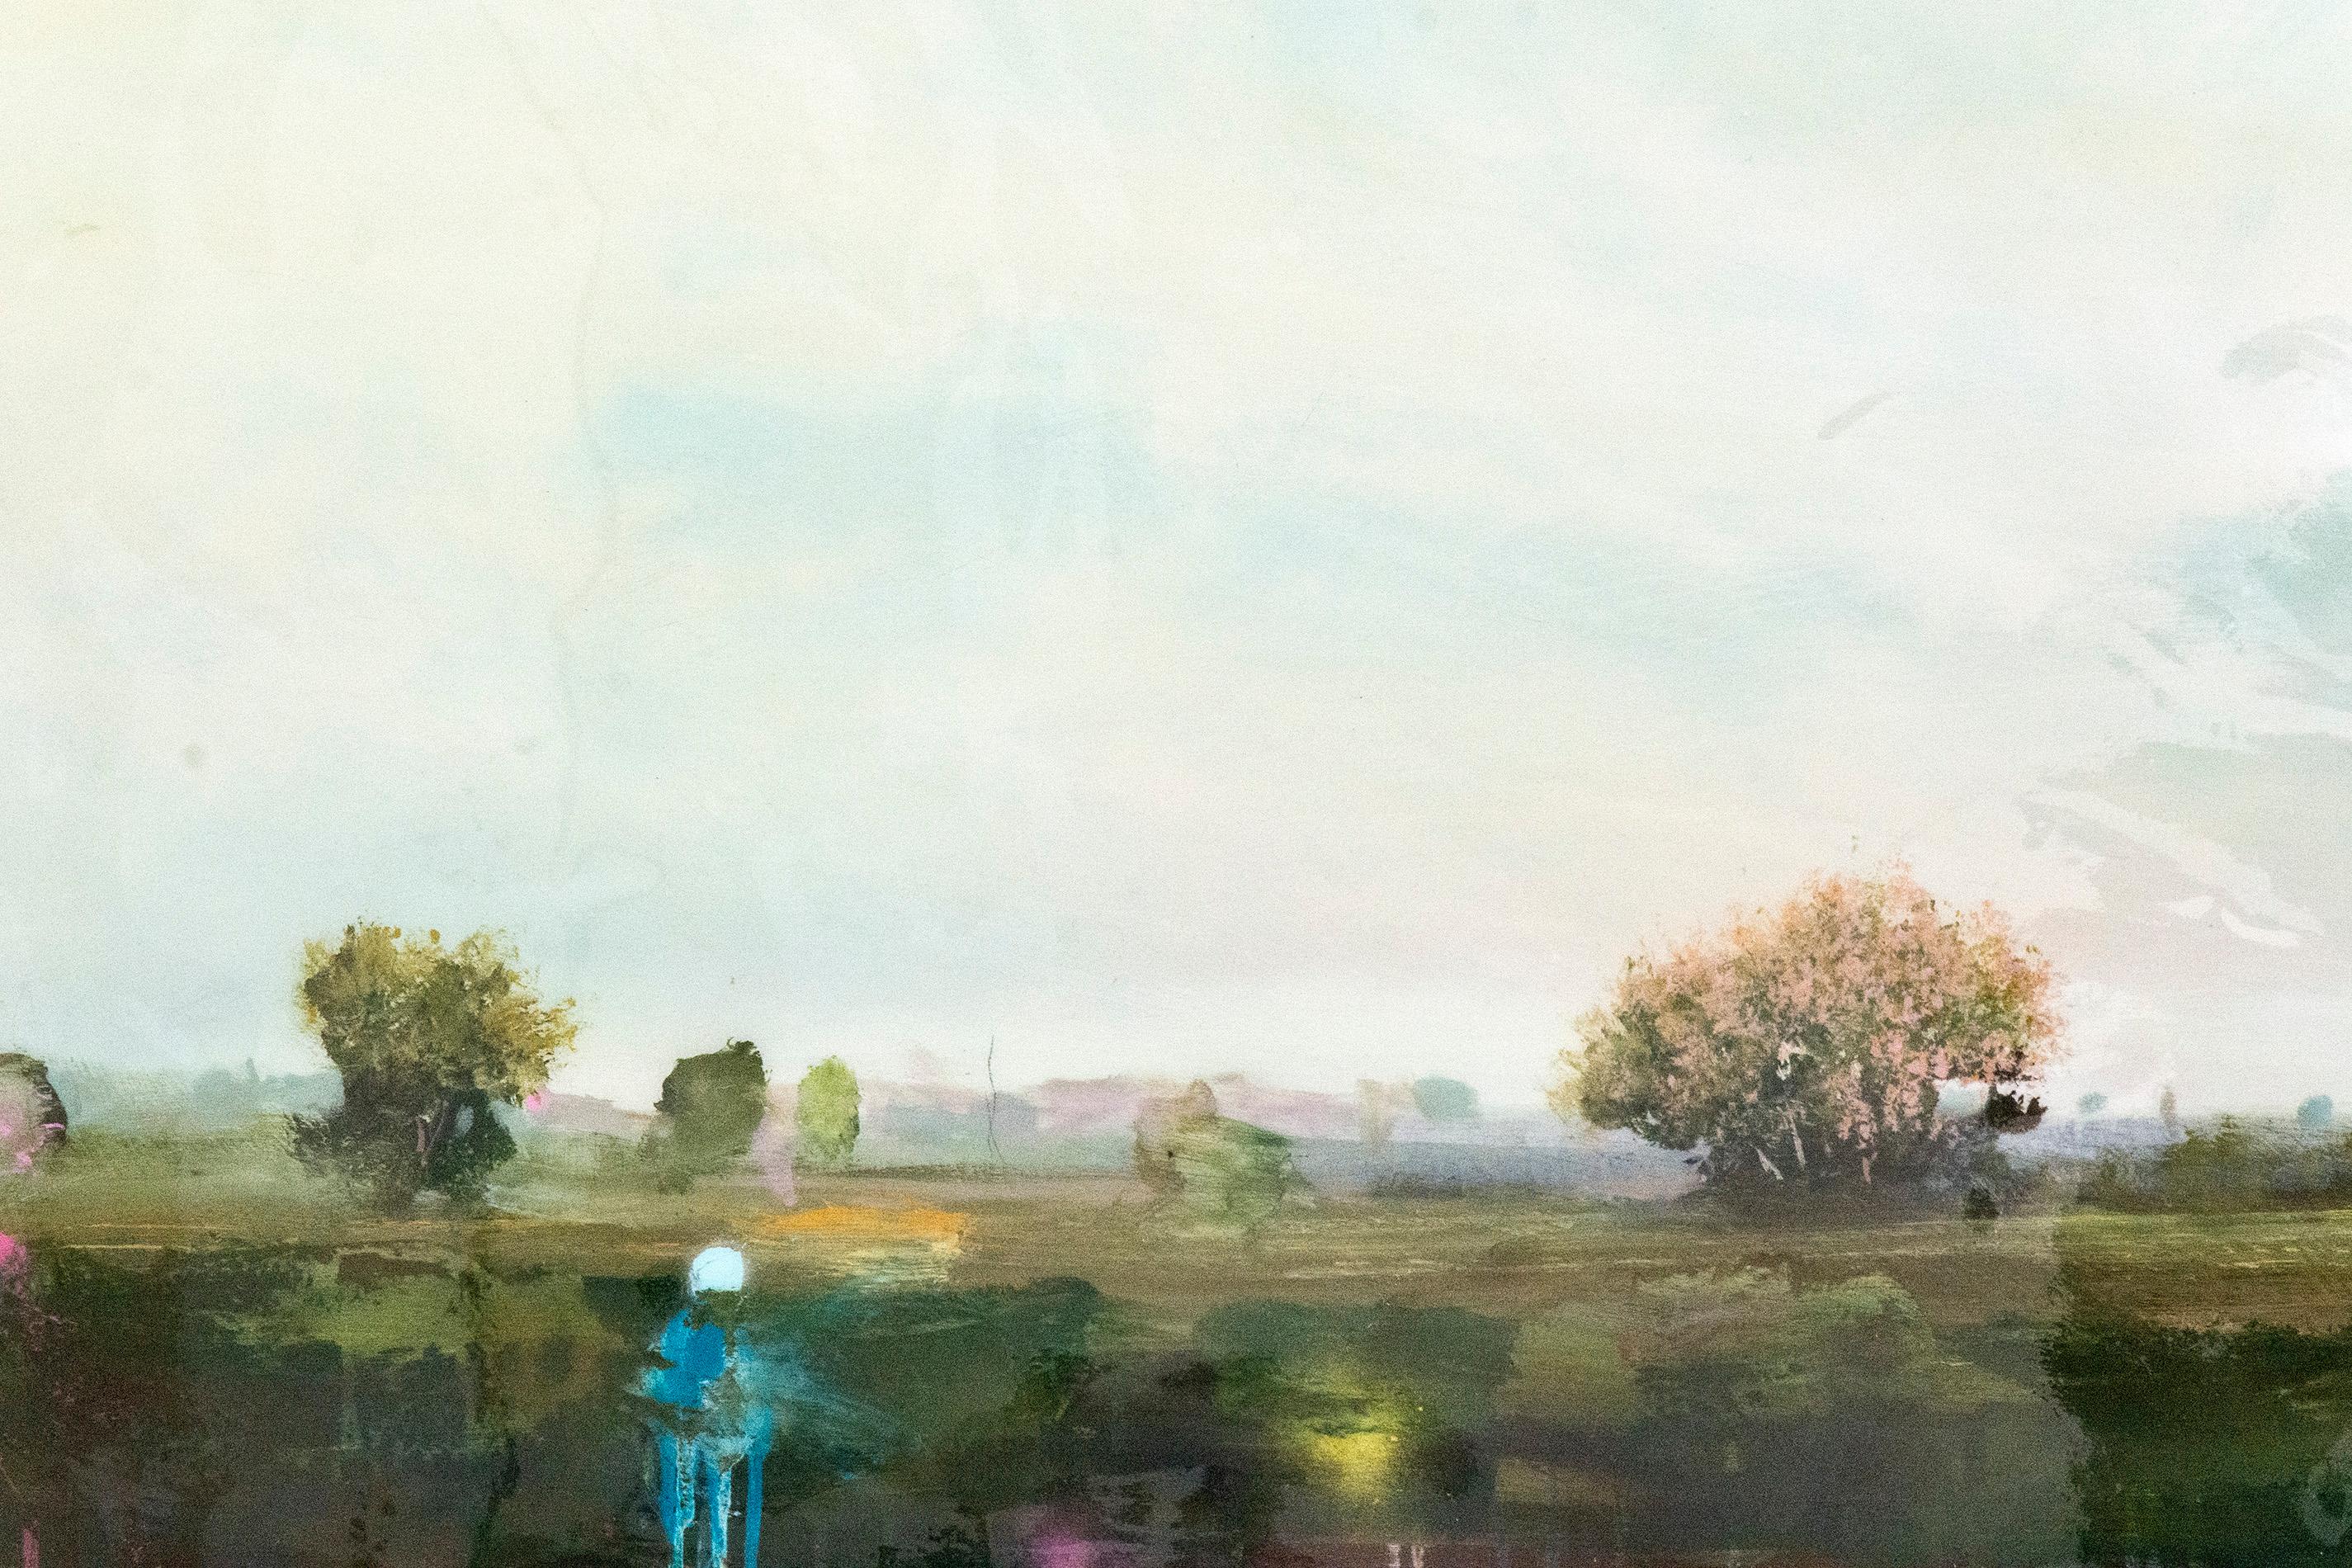 Turquoise, pink and mauve are washed over a classical forested landscape in this horizonal composition by Canadian painter Peter Hoffer. The painting is 'varnished' in resin evoking nostalgia for the forms and techniques of the Romantic